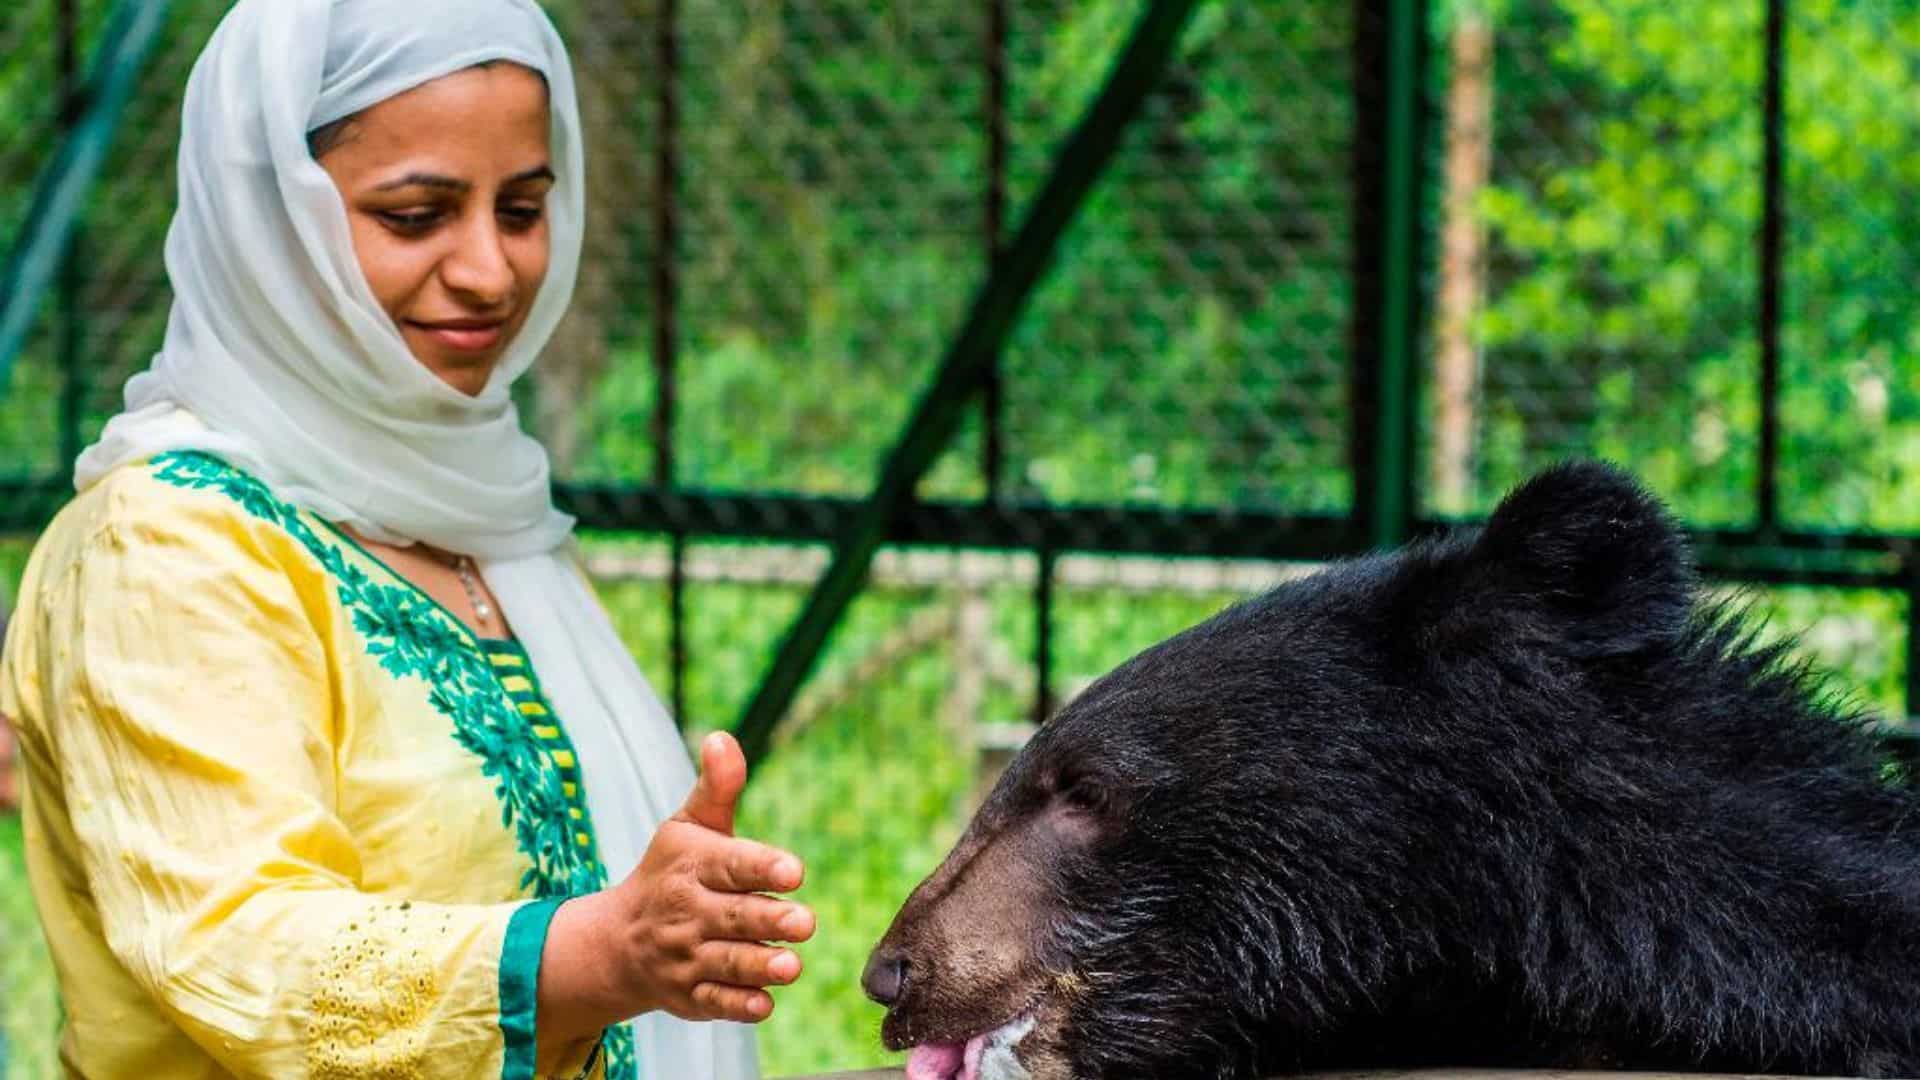 Meet Kashmir’s sole female natural world conservationist who has spent 17 years rescuing wild animals